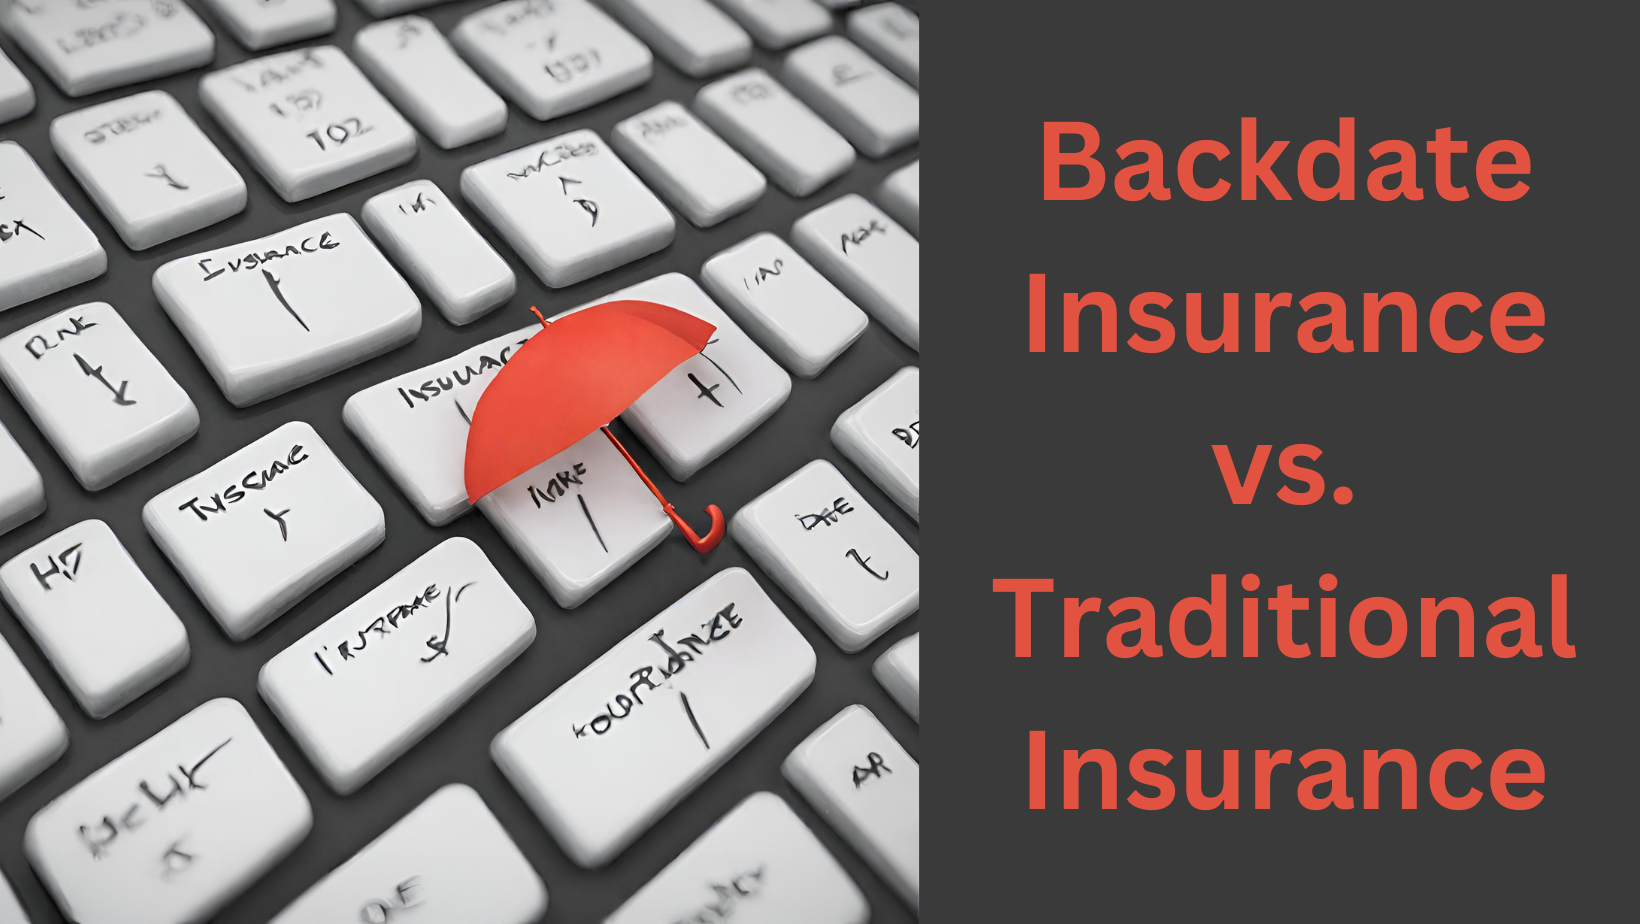 Backdate Insurance vs. Traditional Insurance: Which is Right for You?